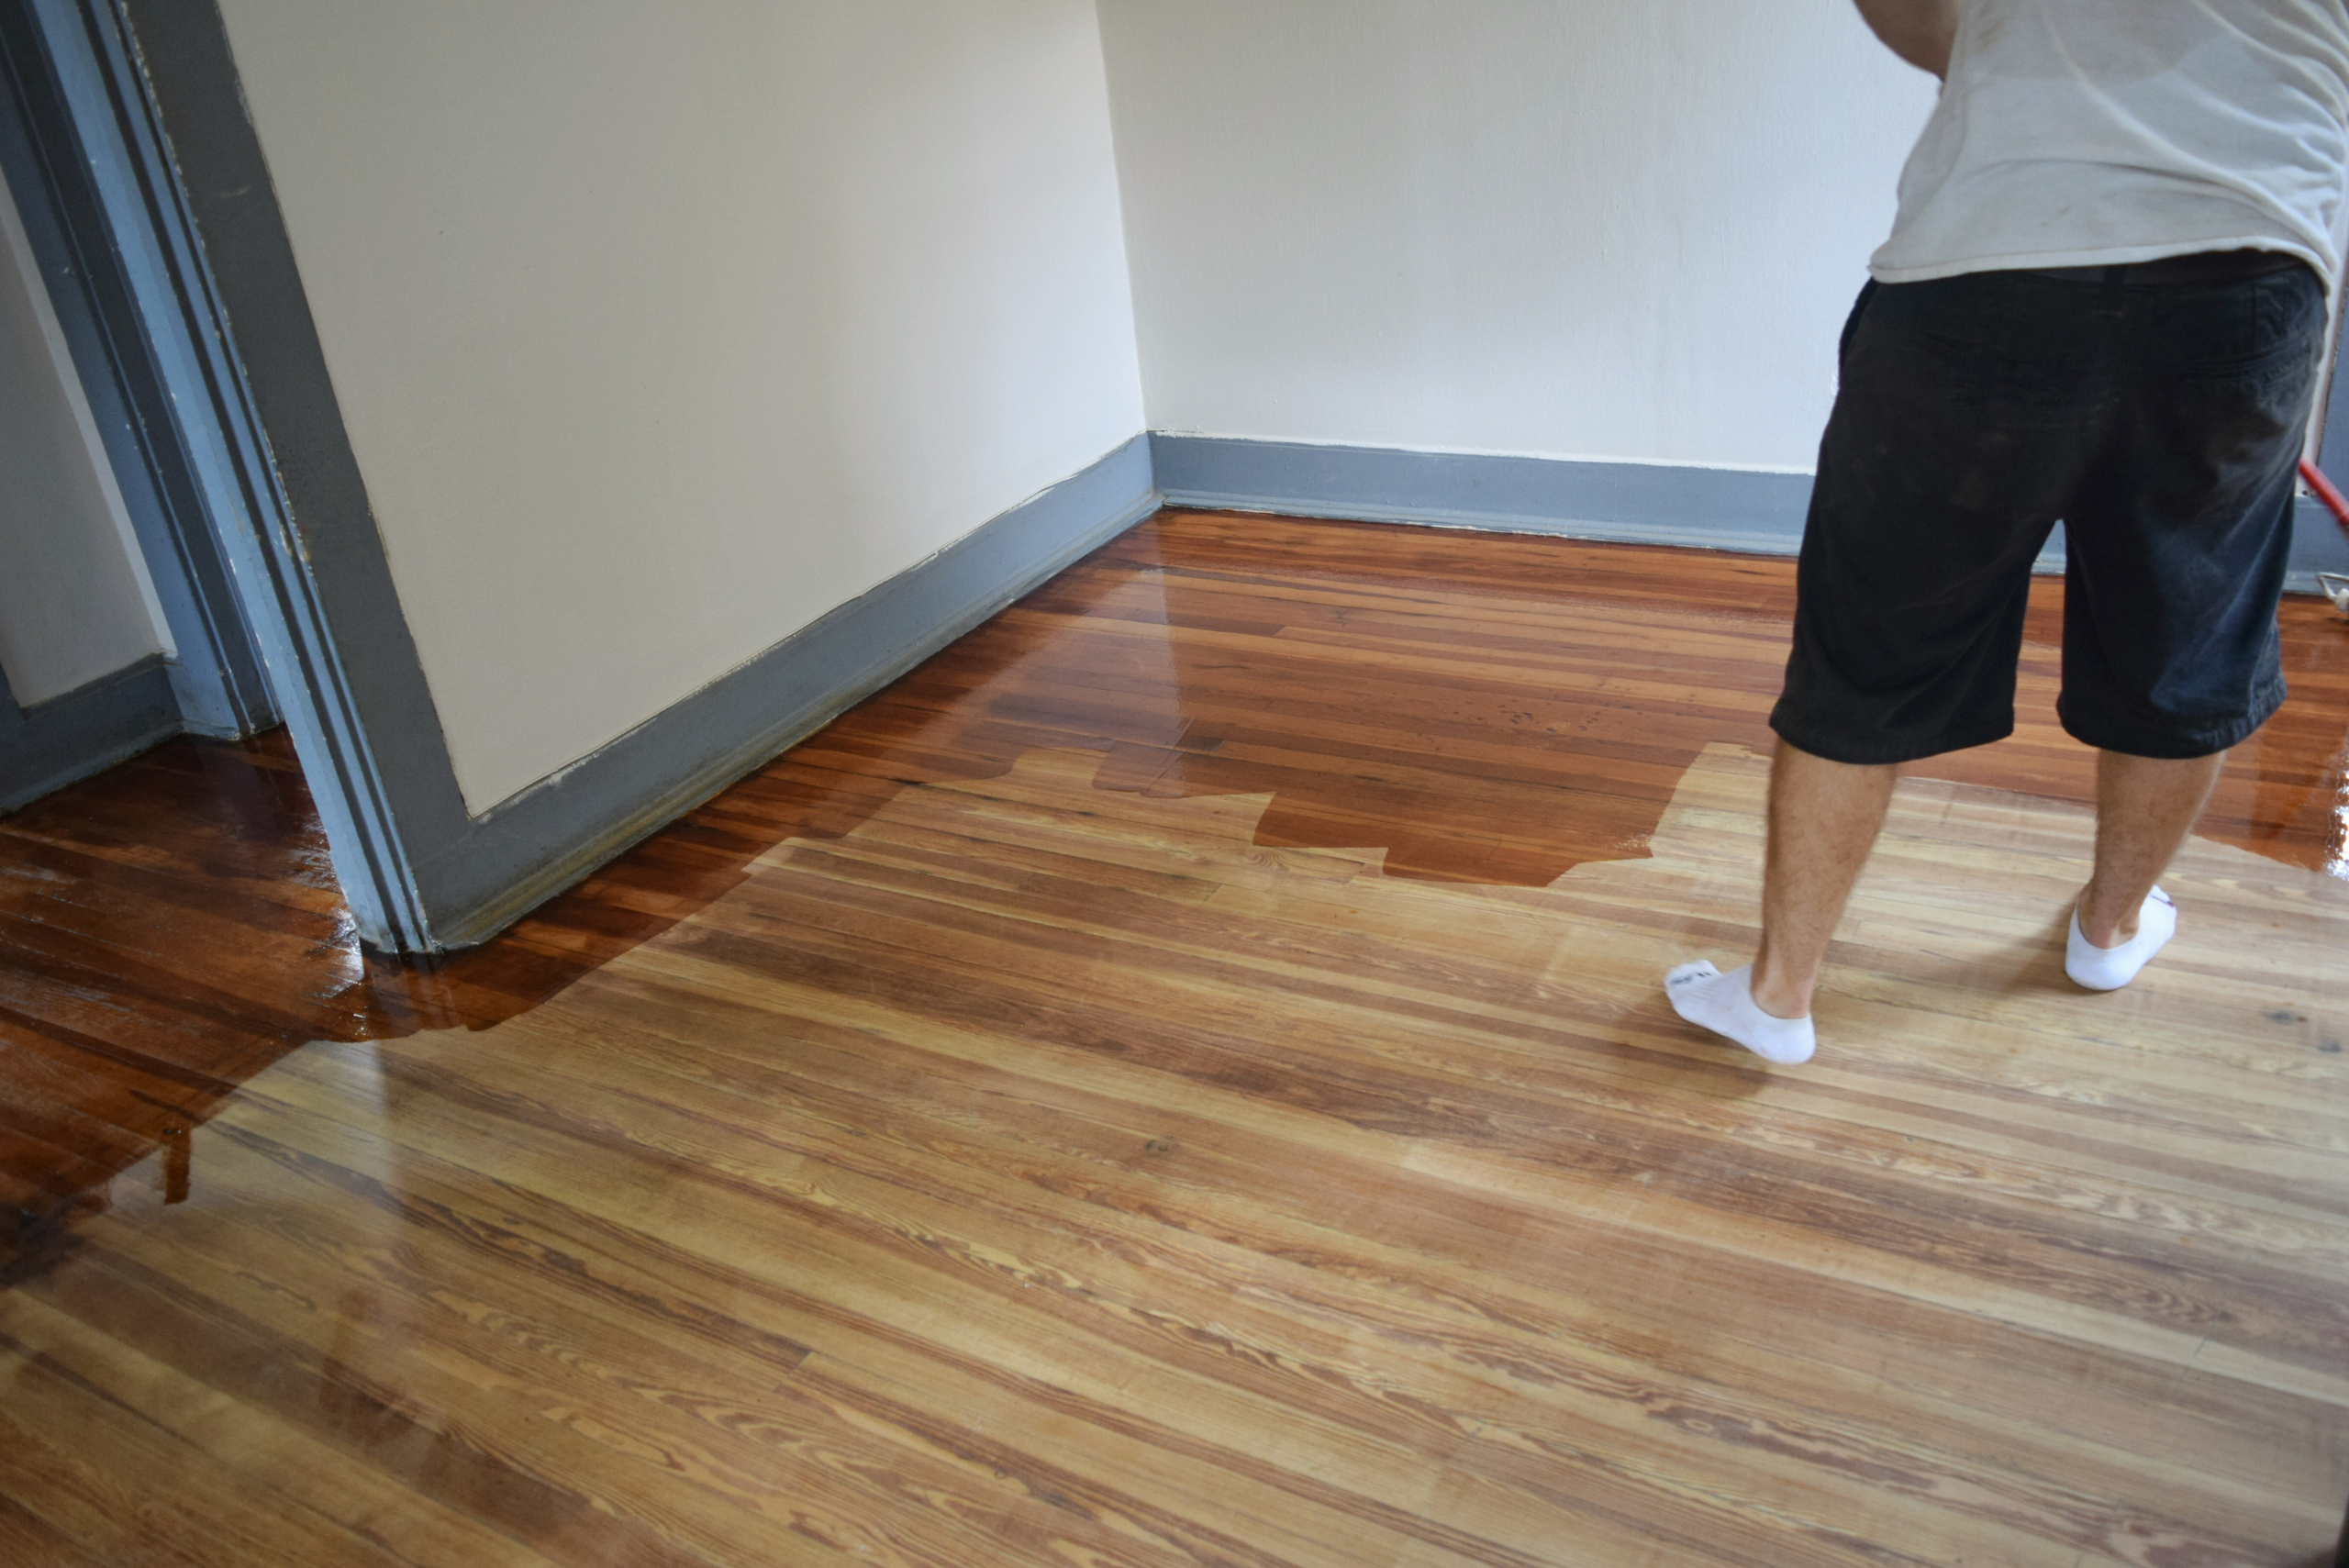 Person staining hardwood flooring using a roller.